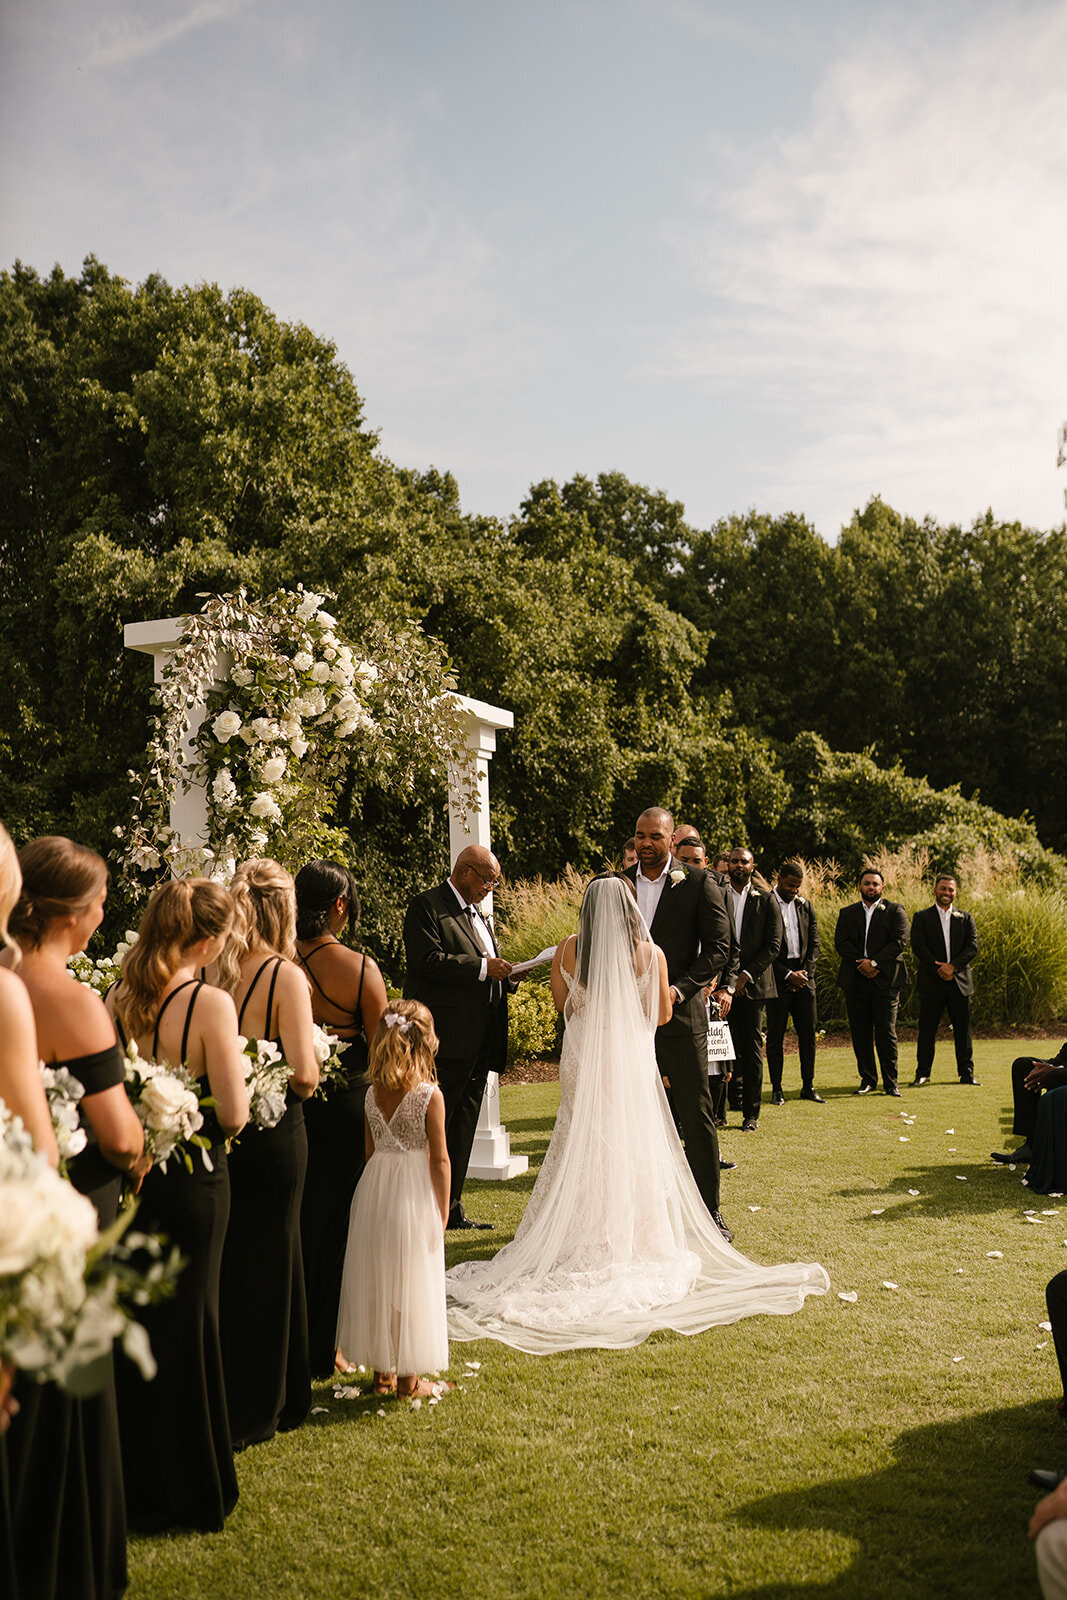 Outdoor ceremony on the lawn